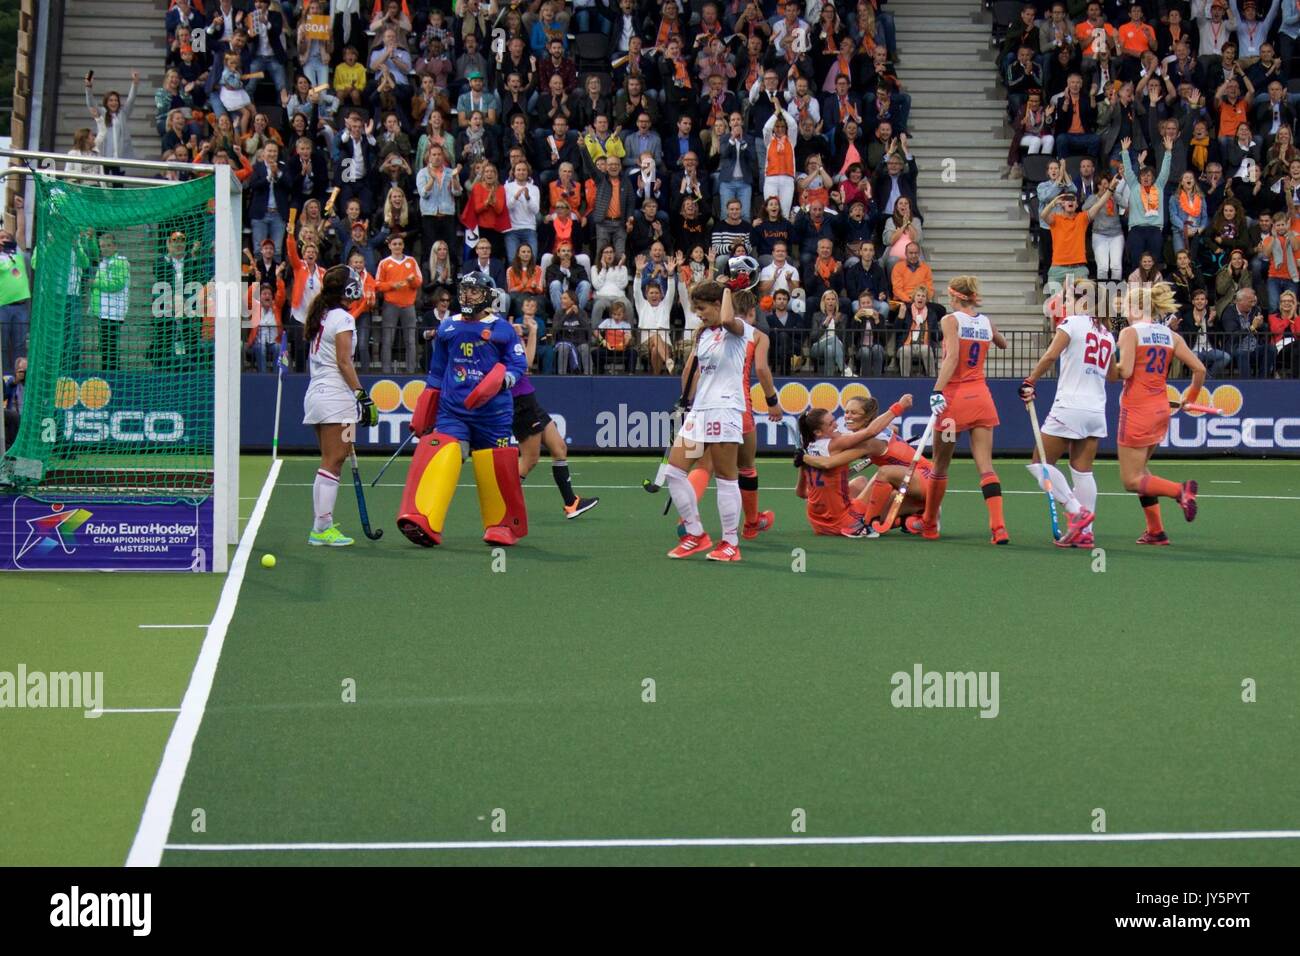 Amsterdam, Netherlands. 18th Aug, 2017. Players of the Netherlands celebrate after scoring during the women's Rabo Eurohockey Championships match between Spain and the Netherlands in Amsterdam, the Netherlands, Aug. 18, 2017. Credit: Sylvia Lederer/Xinhua/Alamy Live News Stock Photo